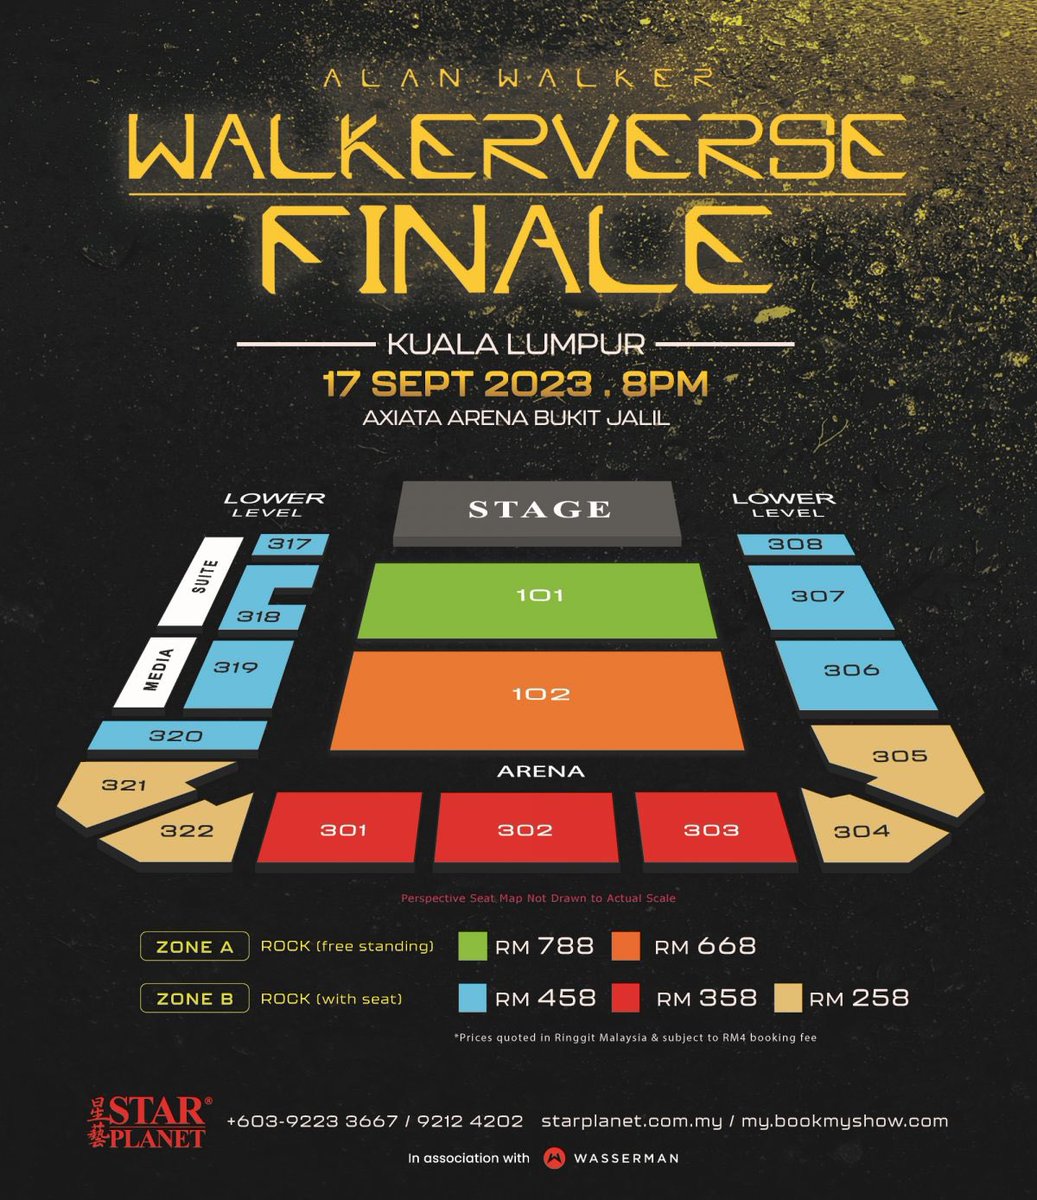 [Ticketing Service] ALAN WALKER'S SPECTACULAR “WALKERVERSE” WOULD TOUR

We provide assist purchase service, welcome to pm for details.

#AlanWalker #WalkerverseWorldTour #KualaLumpur #EDM #LiveMusic #Concert #concertticket #concertmalaysia #ticketingservice #malaysiaconcert